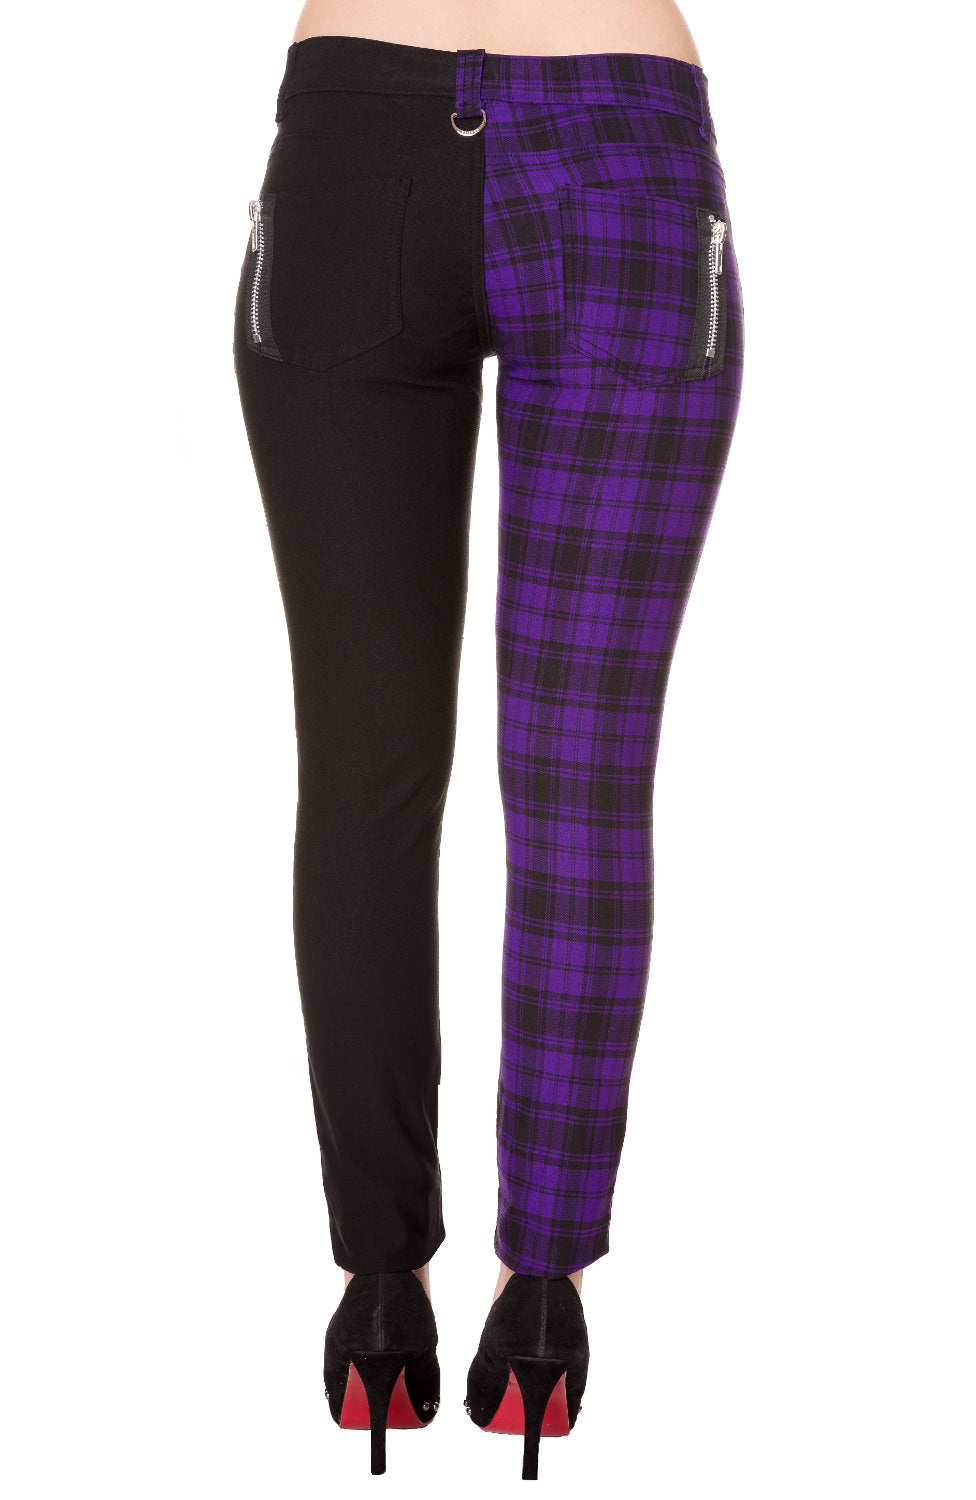 Low rise skinny jeans with one black leg and one purple check leg